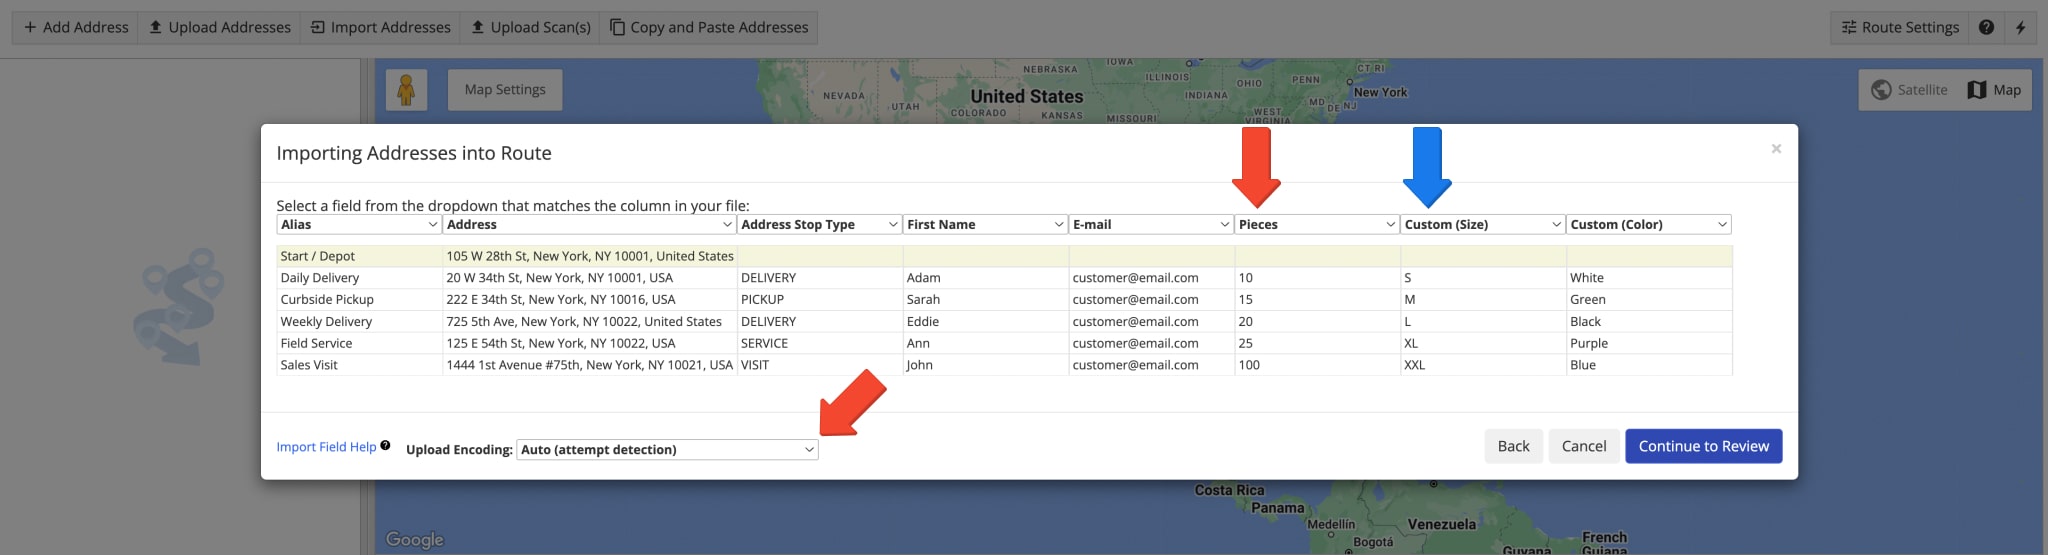 Route4Me Route Planner automatically verifies and validates addresses, route, and customer data in uploaded spreadsheet.